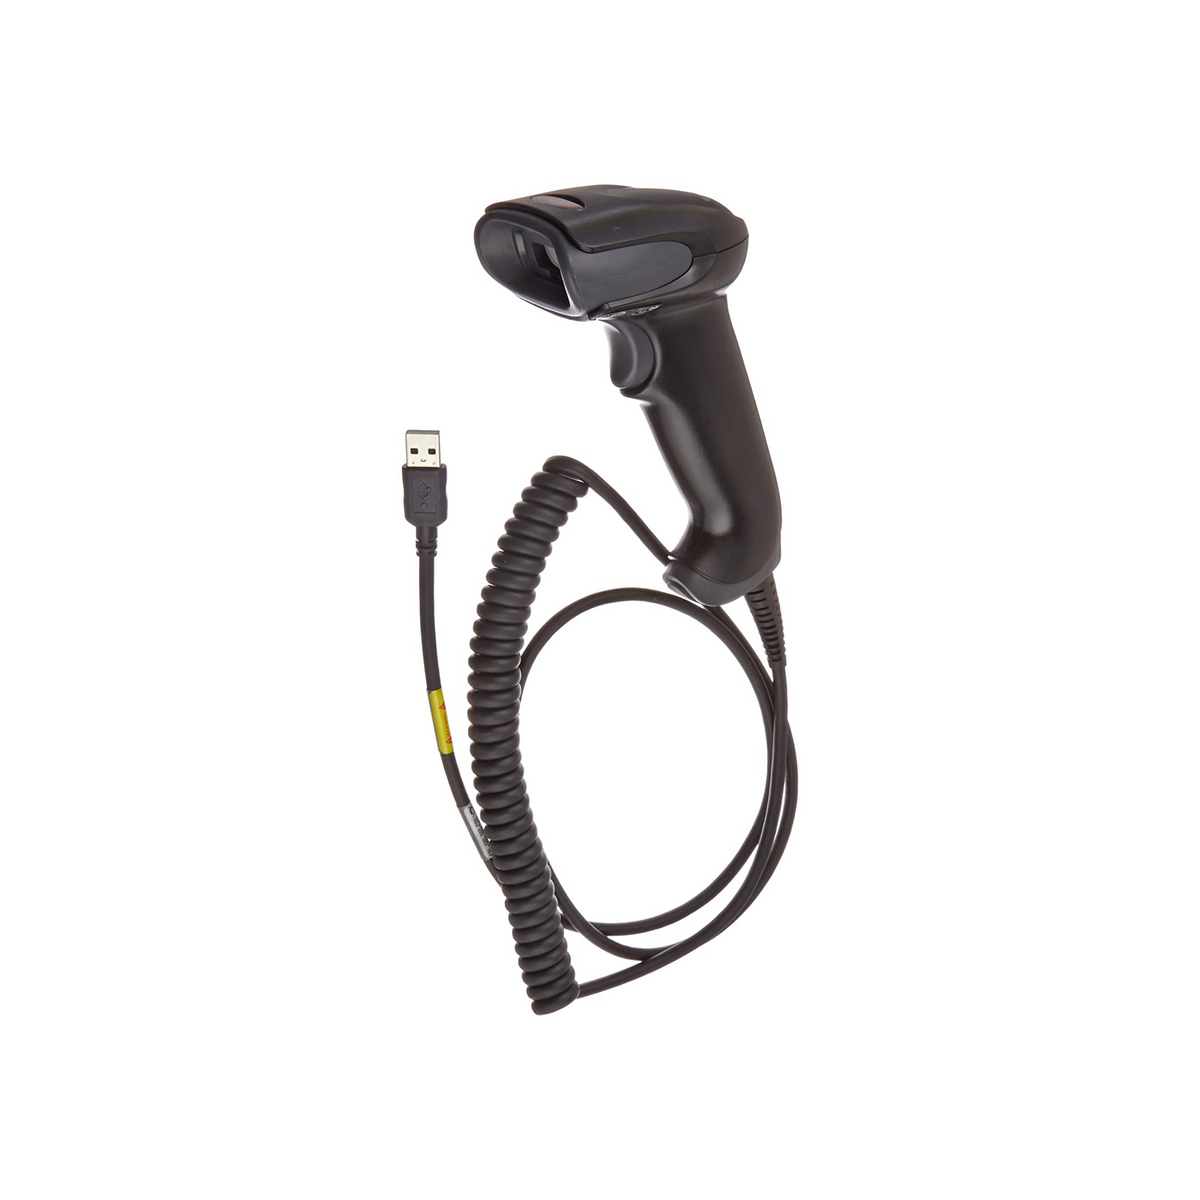 Honeywell, 1250G, USB Kit, 1D, Black Scanner (1250G-2), No Presentation Stand, USB Type A 3M Coiled Cable (Cbl-500-300-C00) and Documentation